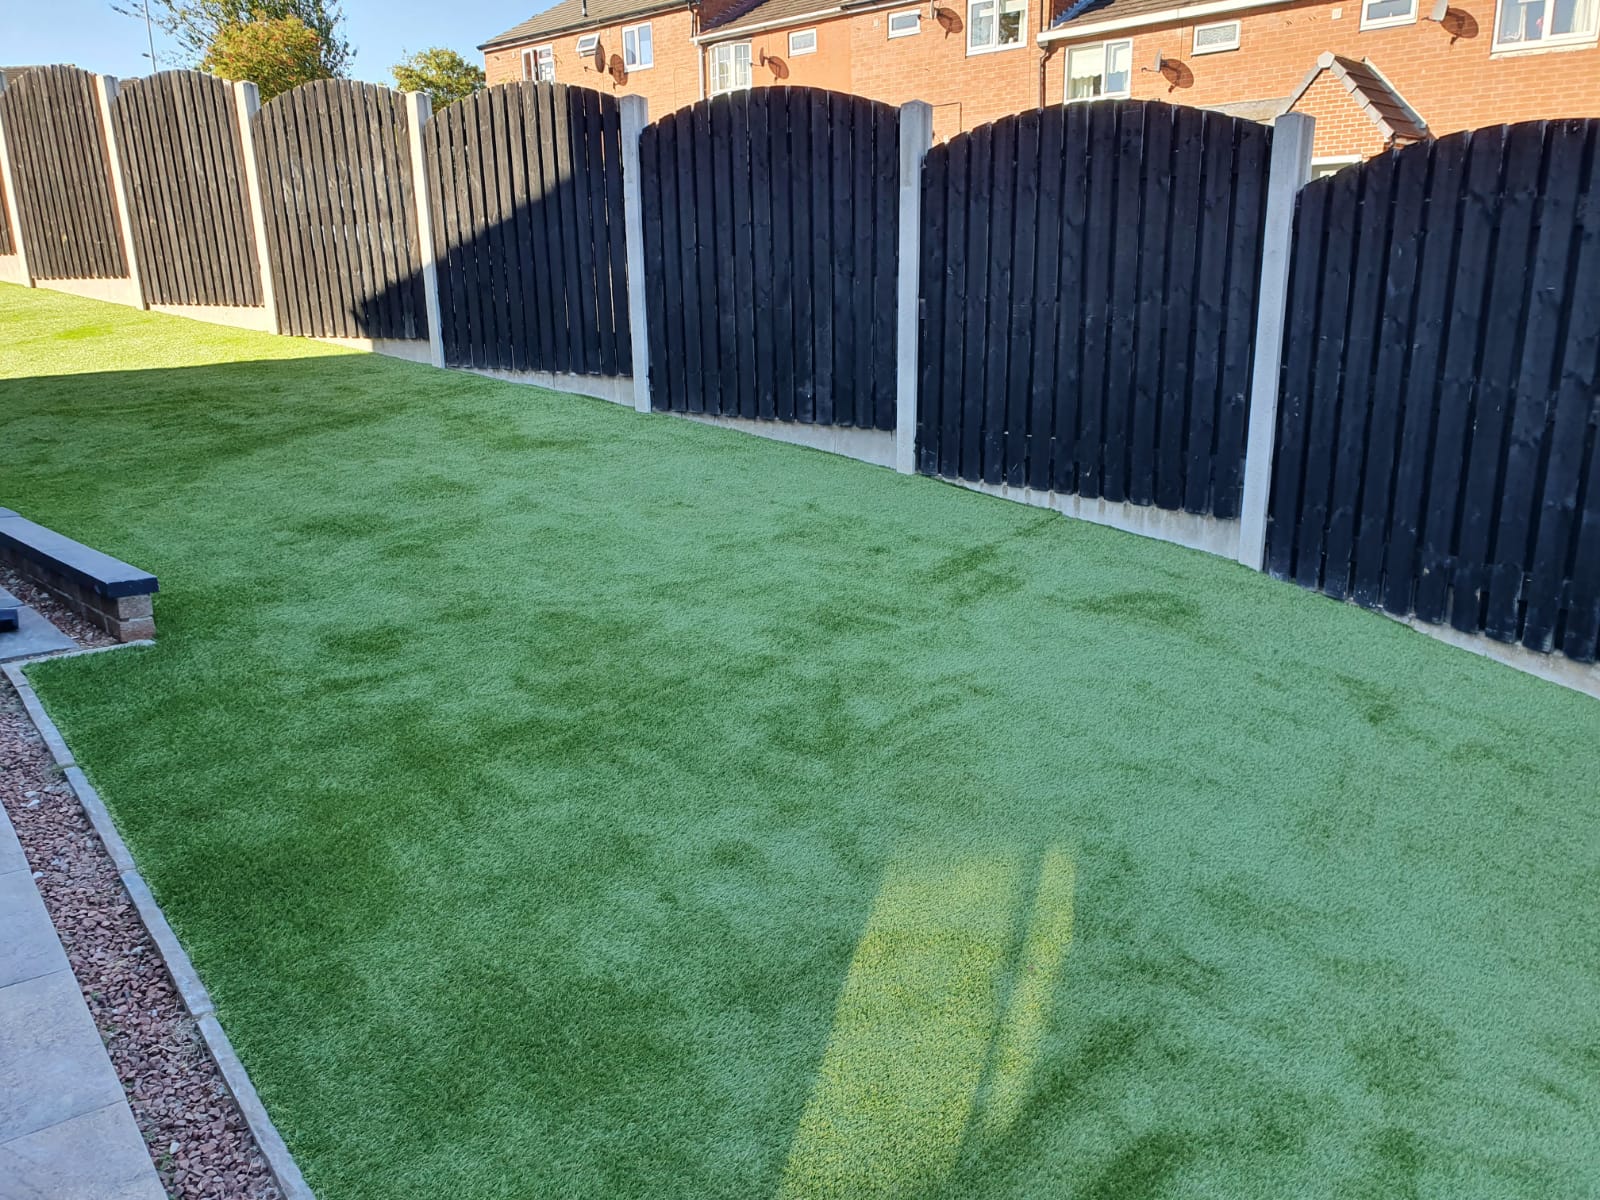 new artificial grass lawn in Old Whittington Chesterfield